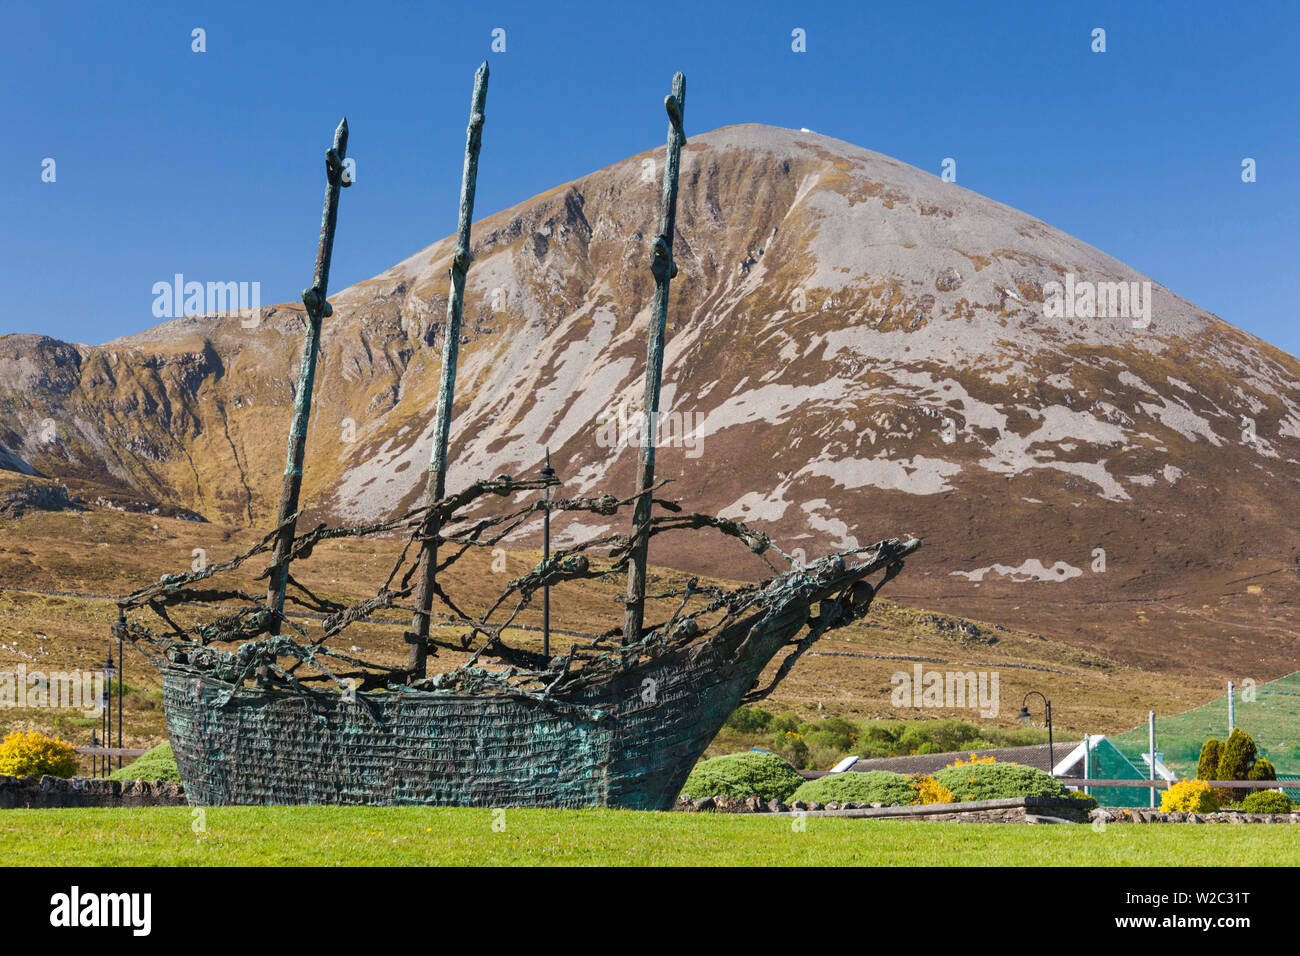 Ireland, County Mayo, Murrisk, view of Croagh Patrick Holy Mountain with National Famine Monument Stock Photo